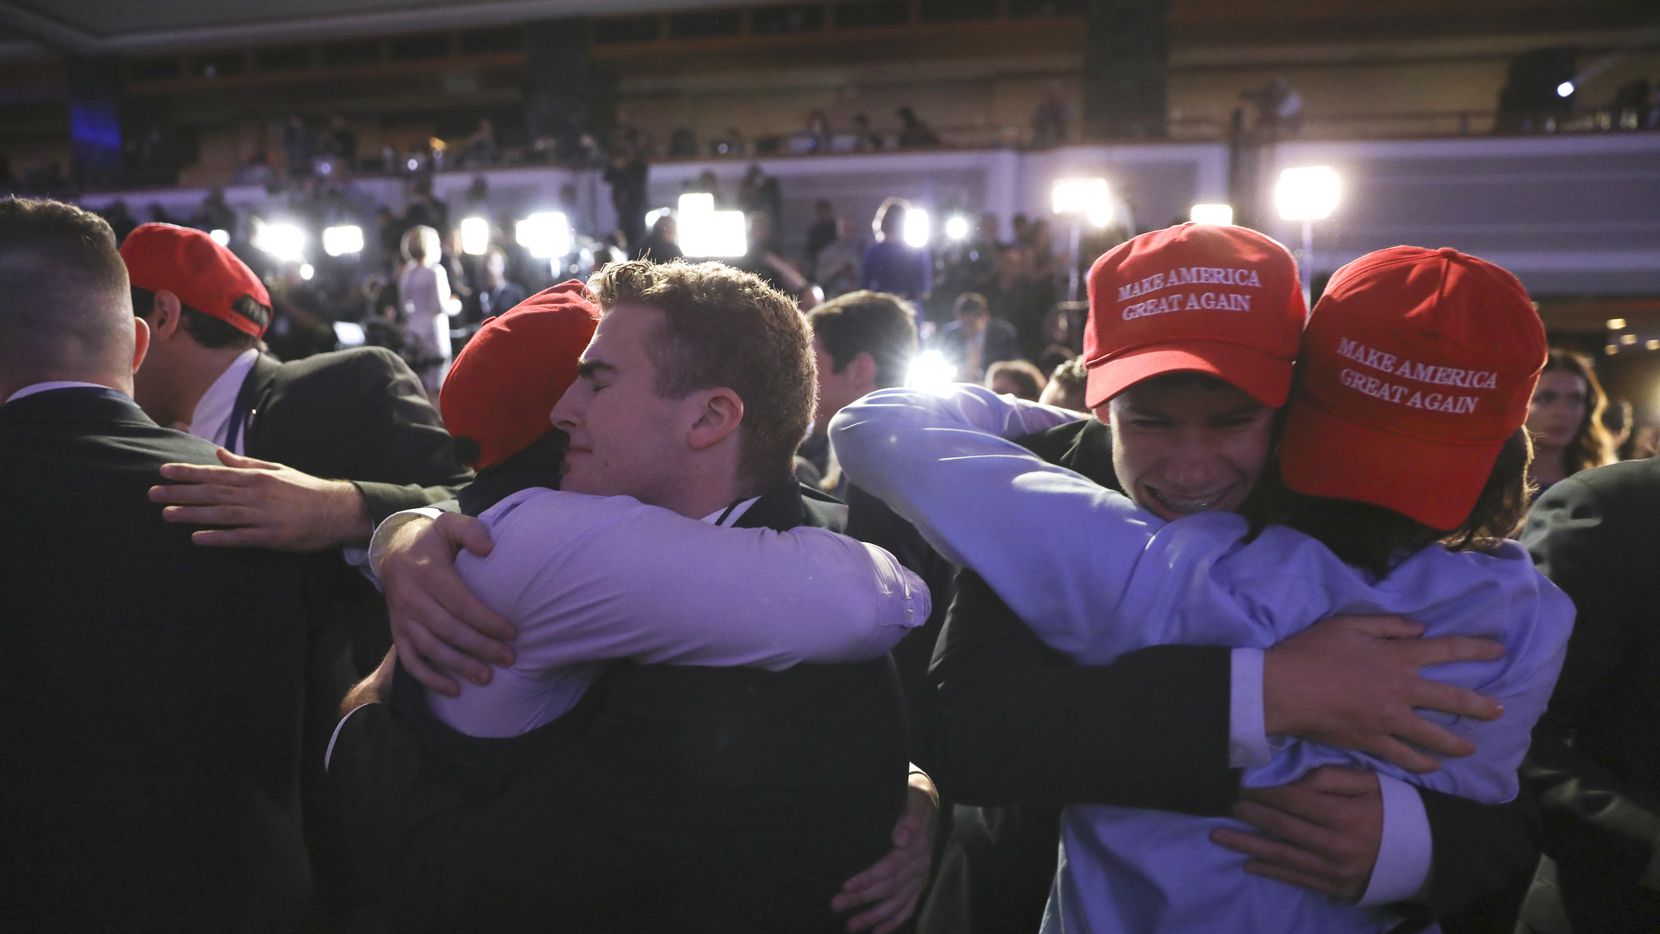 Supporters celebrate at Donald Trump's election night event at the New York Hilton Midtown...